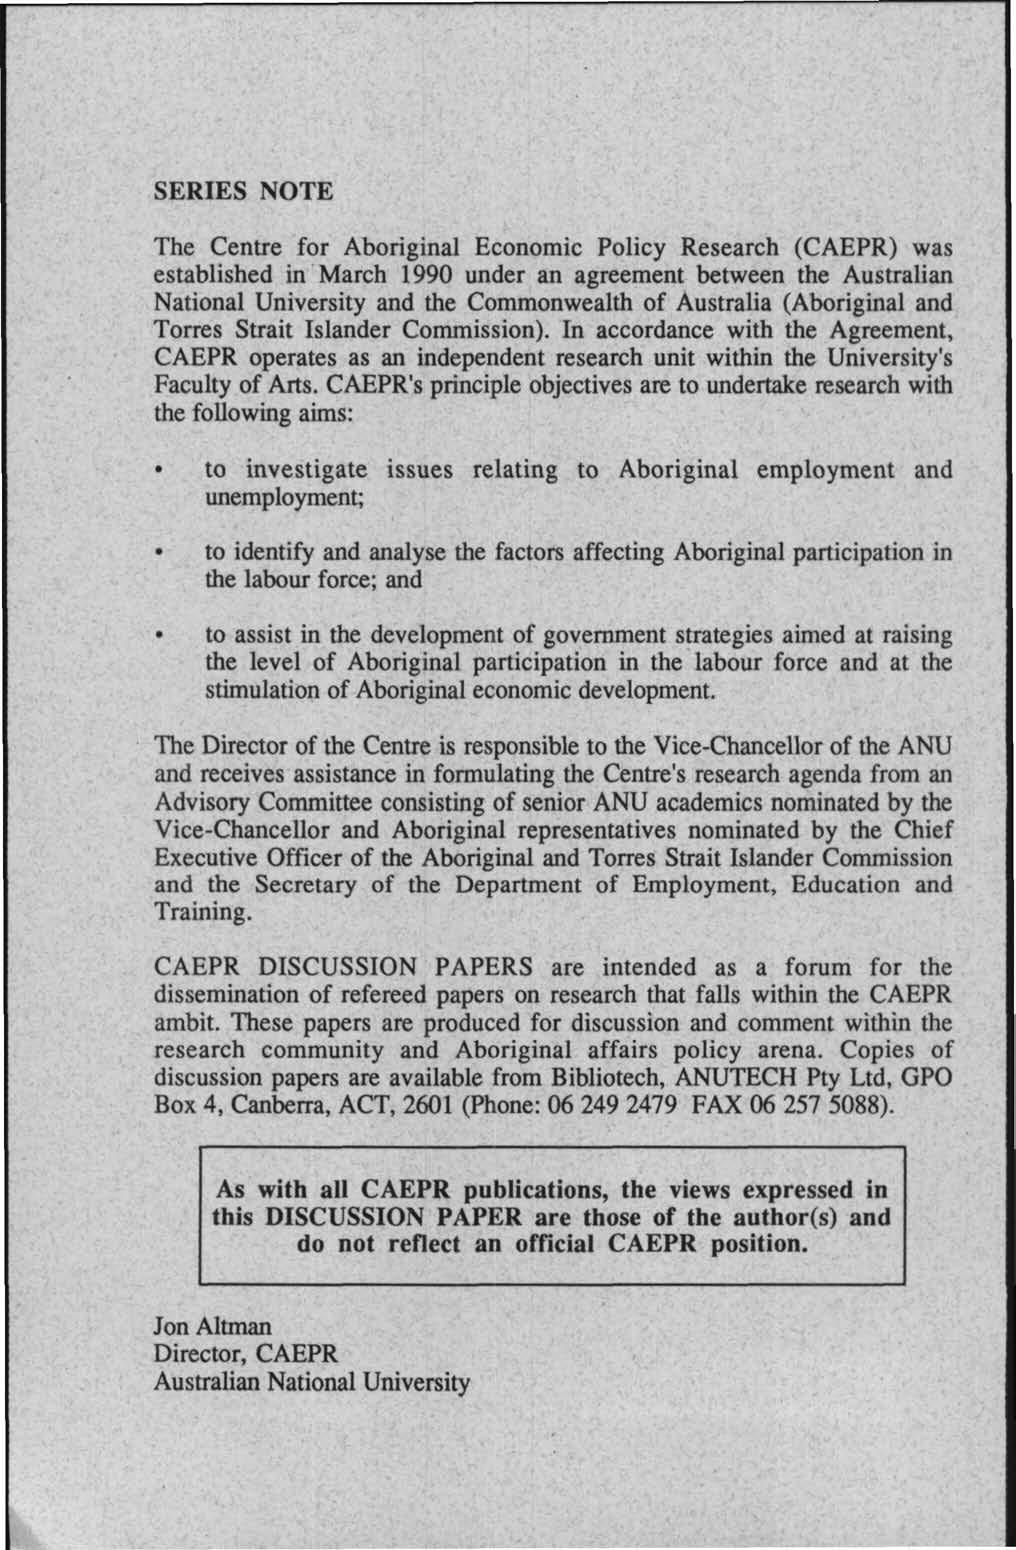 SERIES NOTE The Centre for Aboriginal Economic Policy Research (CAEPR) was established in March 1990 under an agreement between the Australian National University and the Commonwealth of Australia